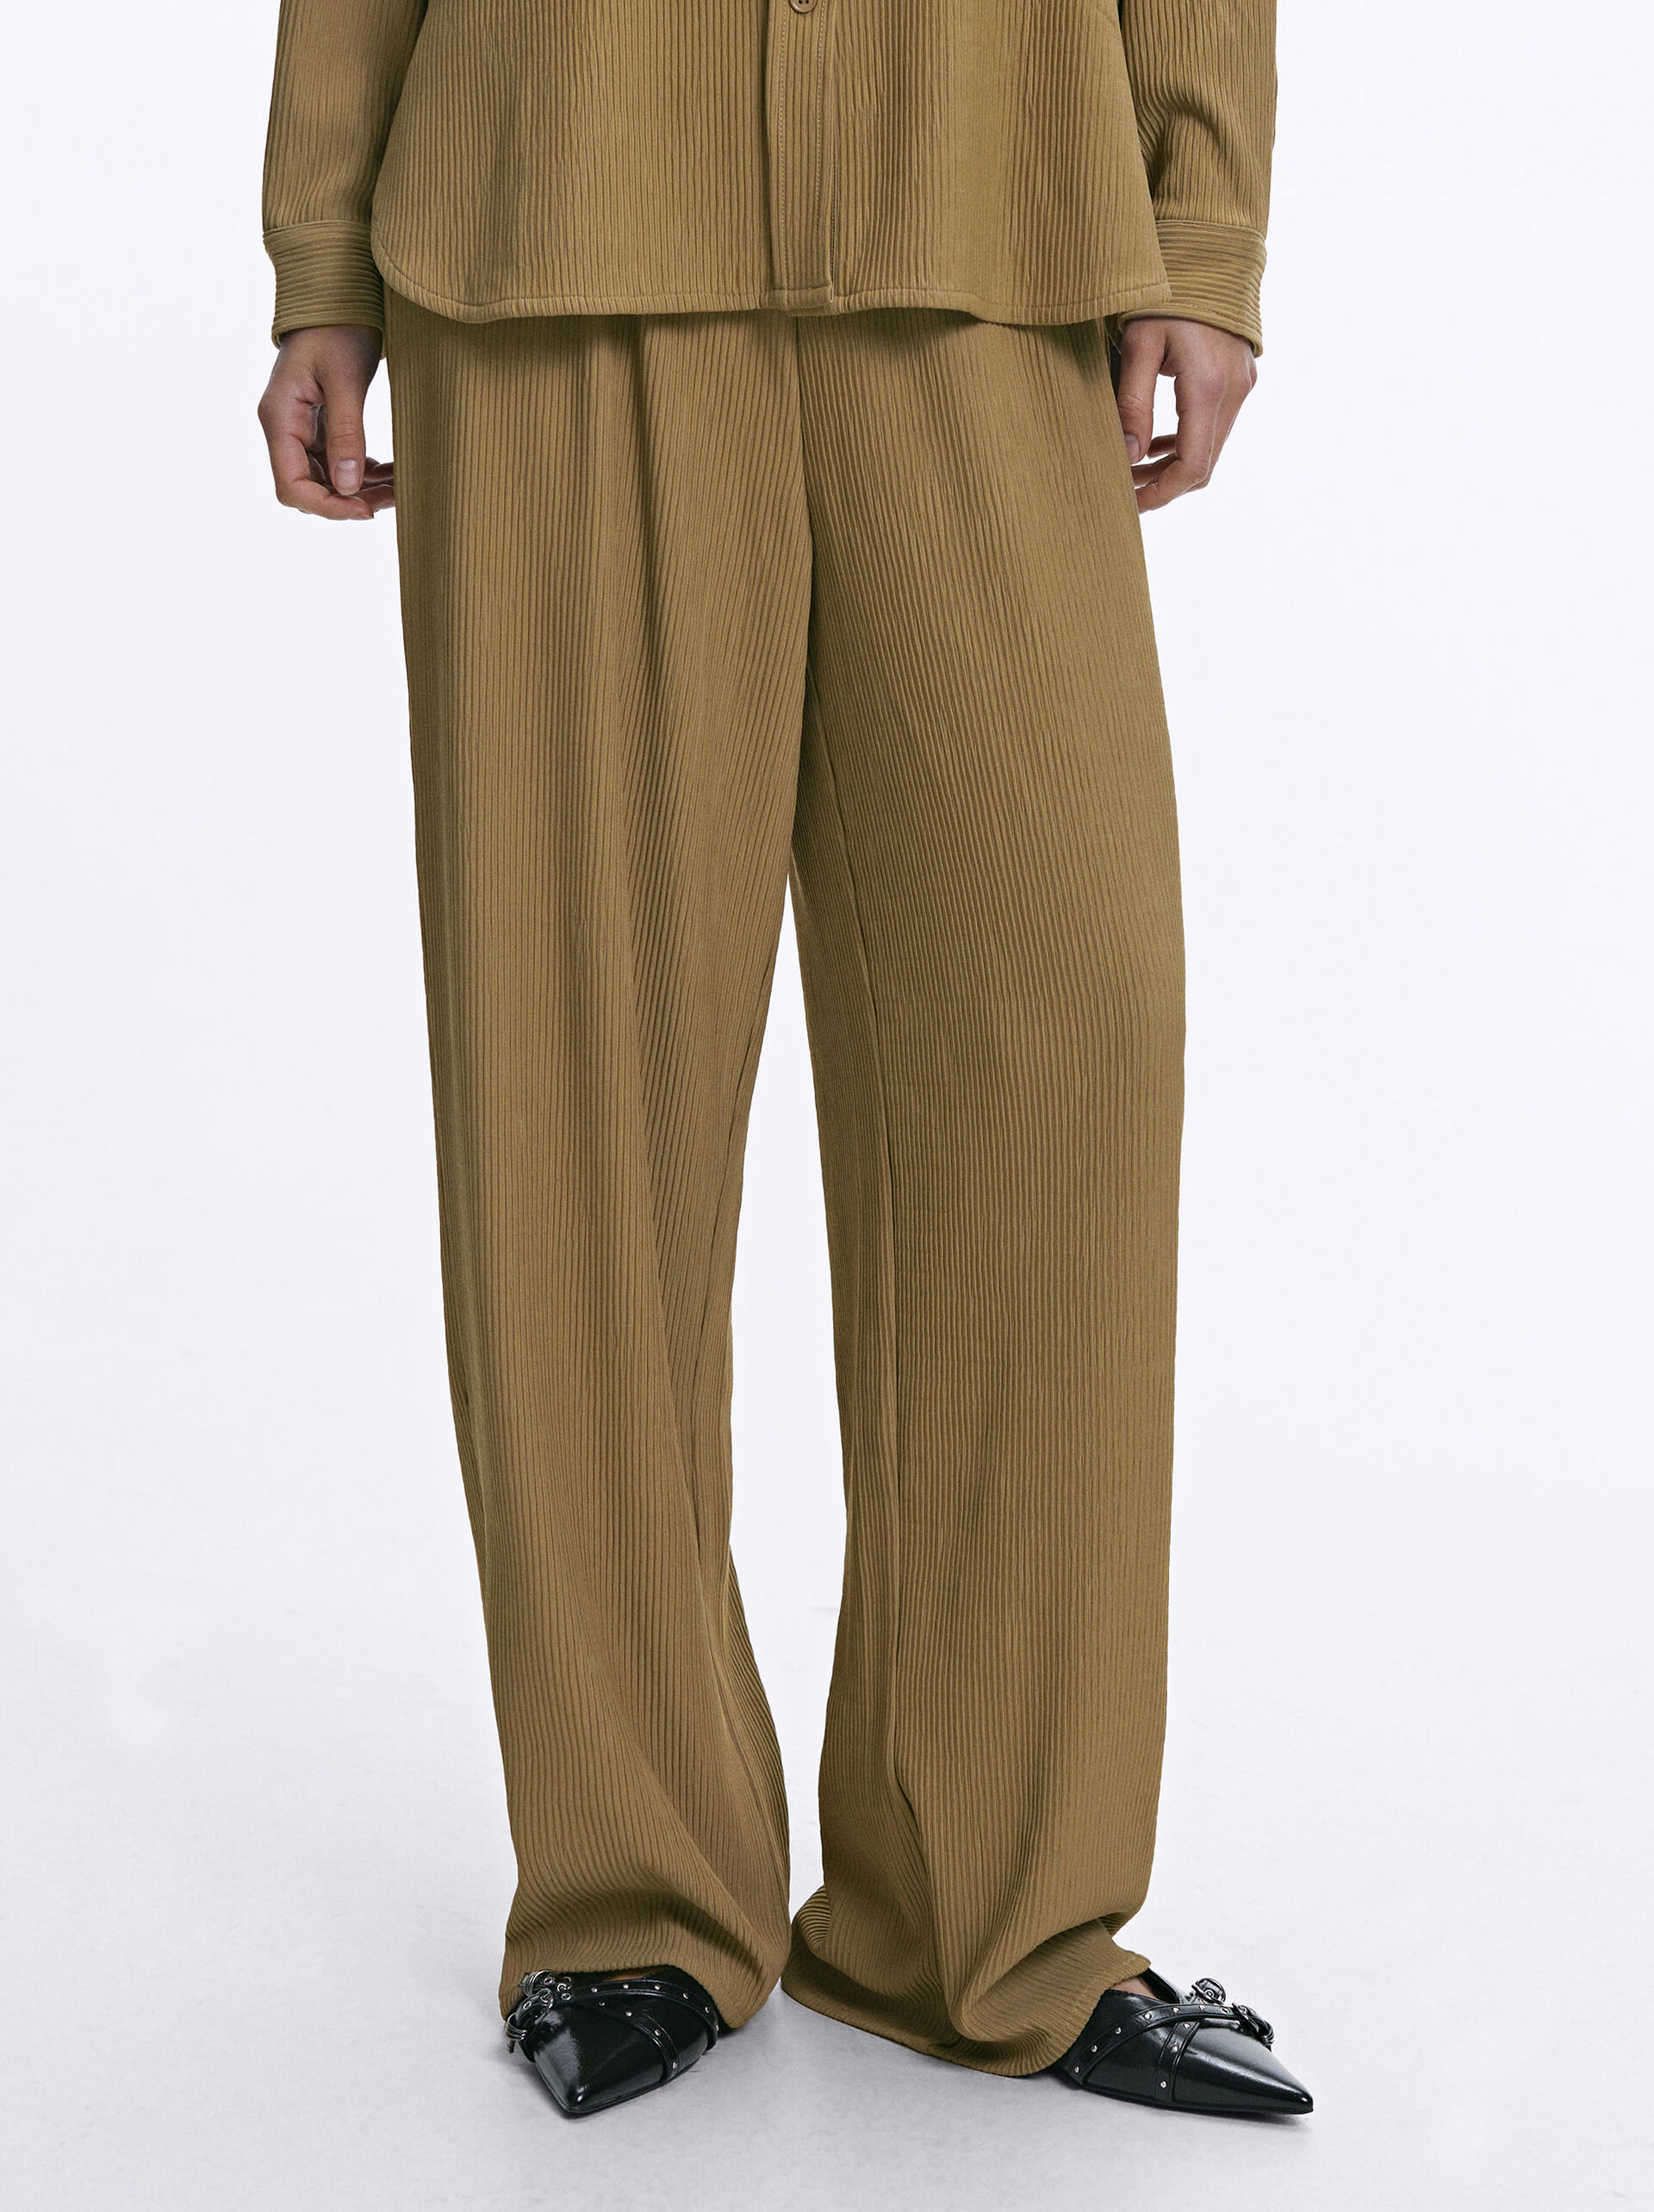 Loose-Fitting Trousers With Elastic Waistband image number 1.0